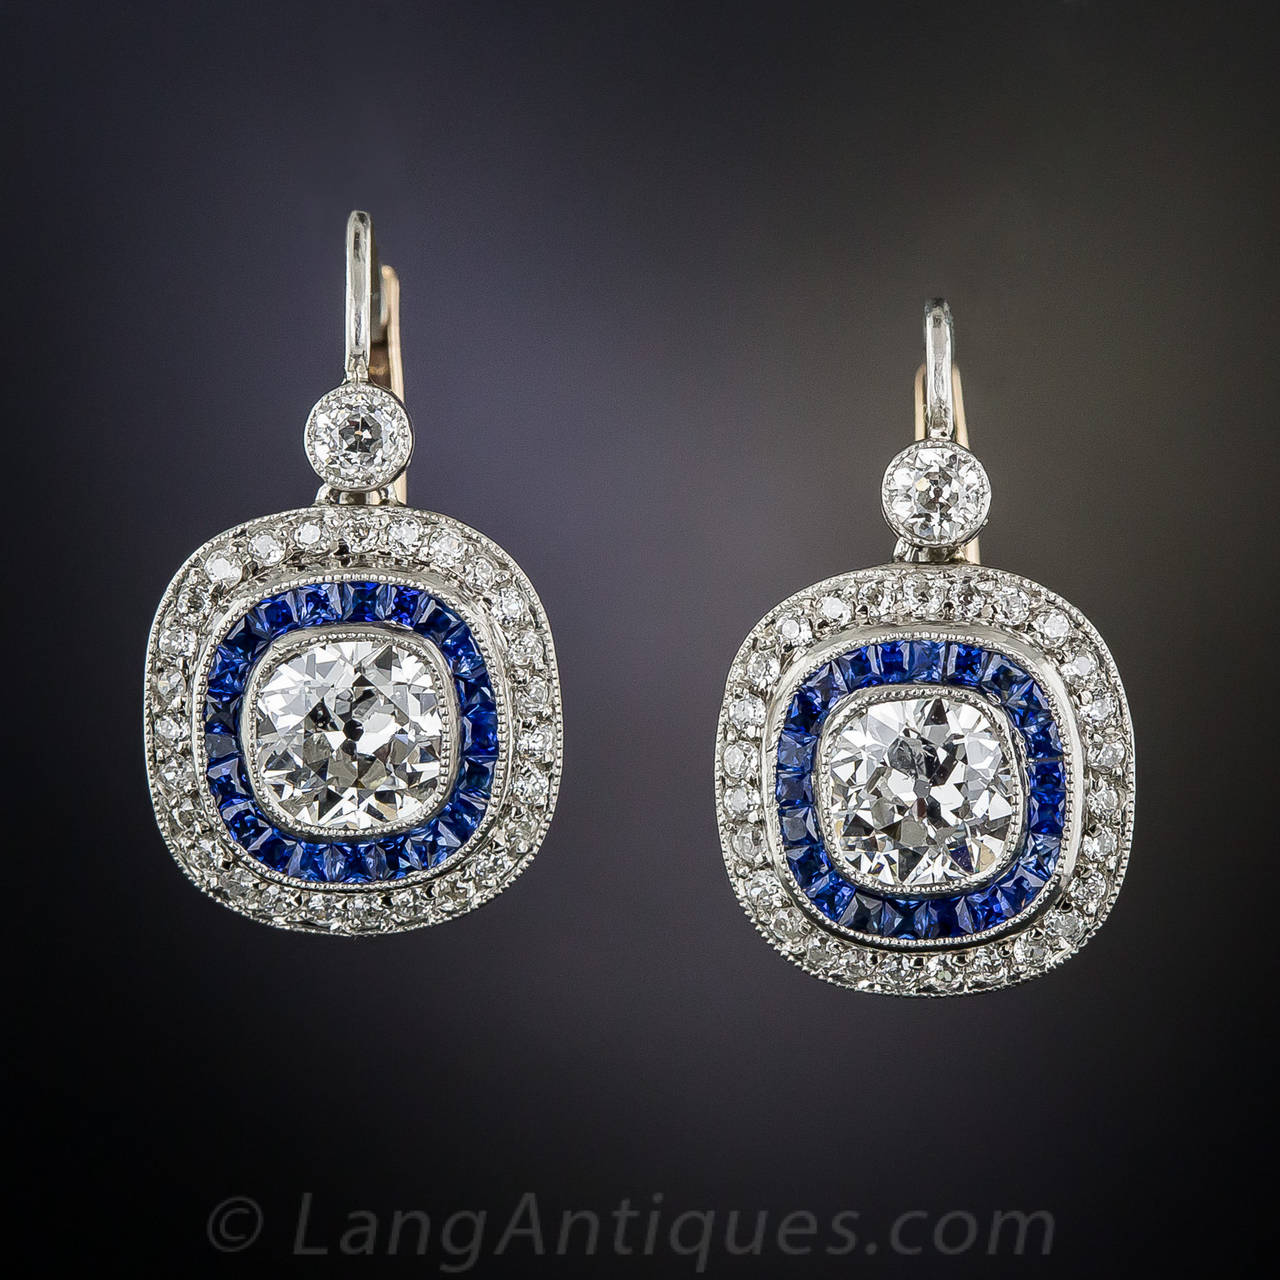 A beautiful pair of bright white antique cushion-cut diamonds, weighing one carat-plus each, have found a perfect new home in these exceptionally well made earrings, rendered in platinum, diamonds and electric blue, faceted calibre sapphires. The